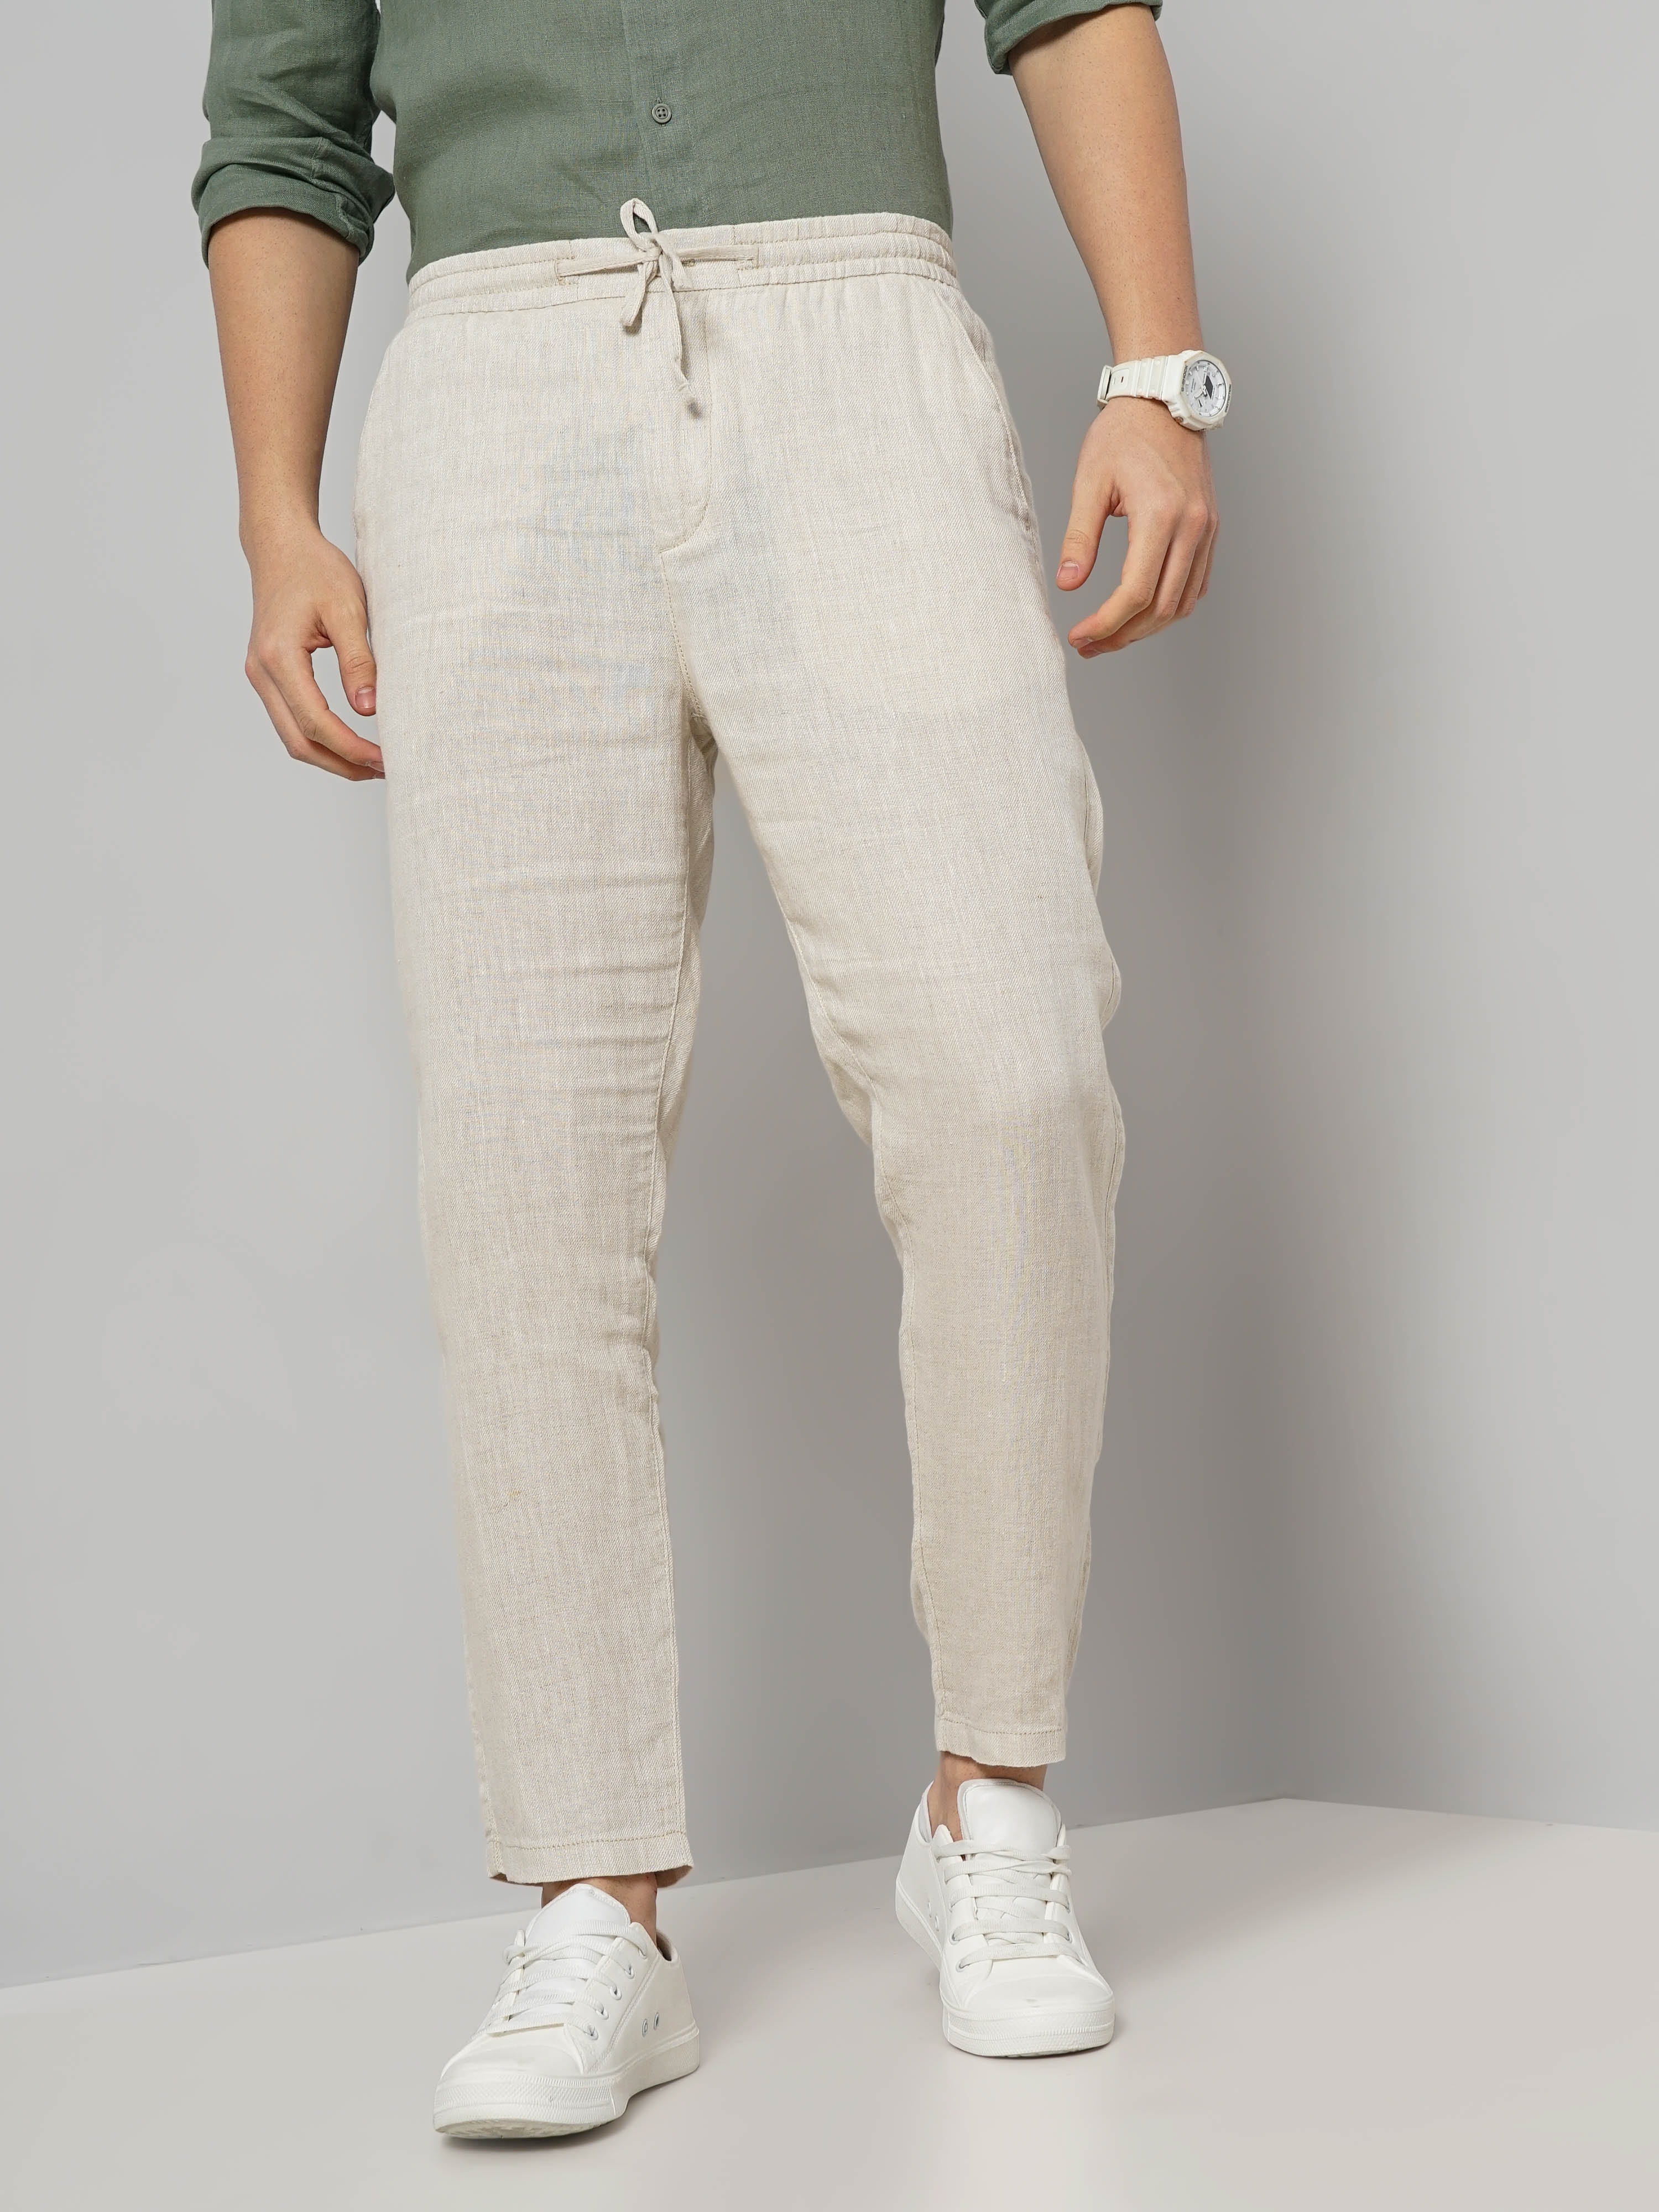 Celio Men Off White Solid Regular Fit Linen Casual Trousers